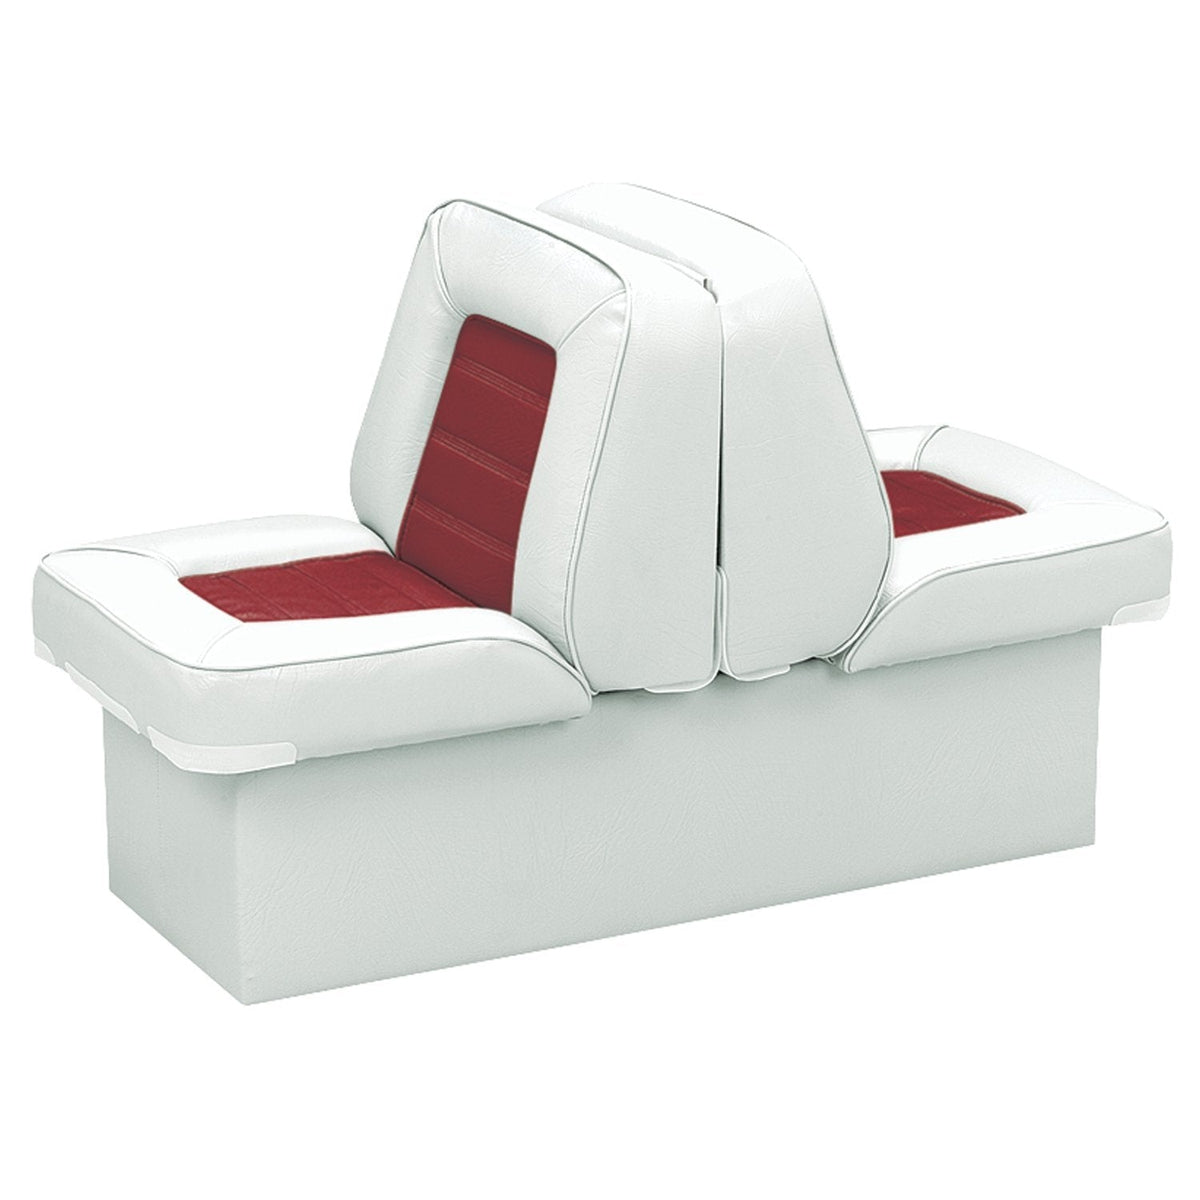 Wise Oversized - Not Qualified for Free Shipping Wise Lounge Seat Deluxe Skyline White/Red #8WD505P-1-925